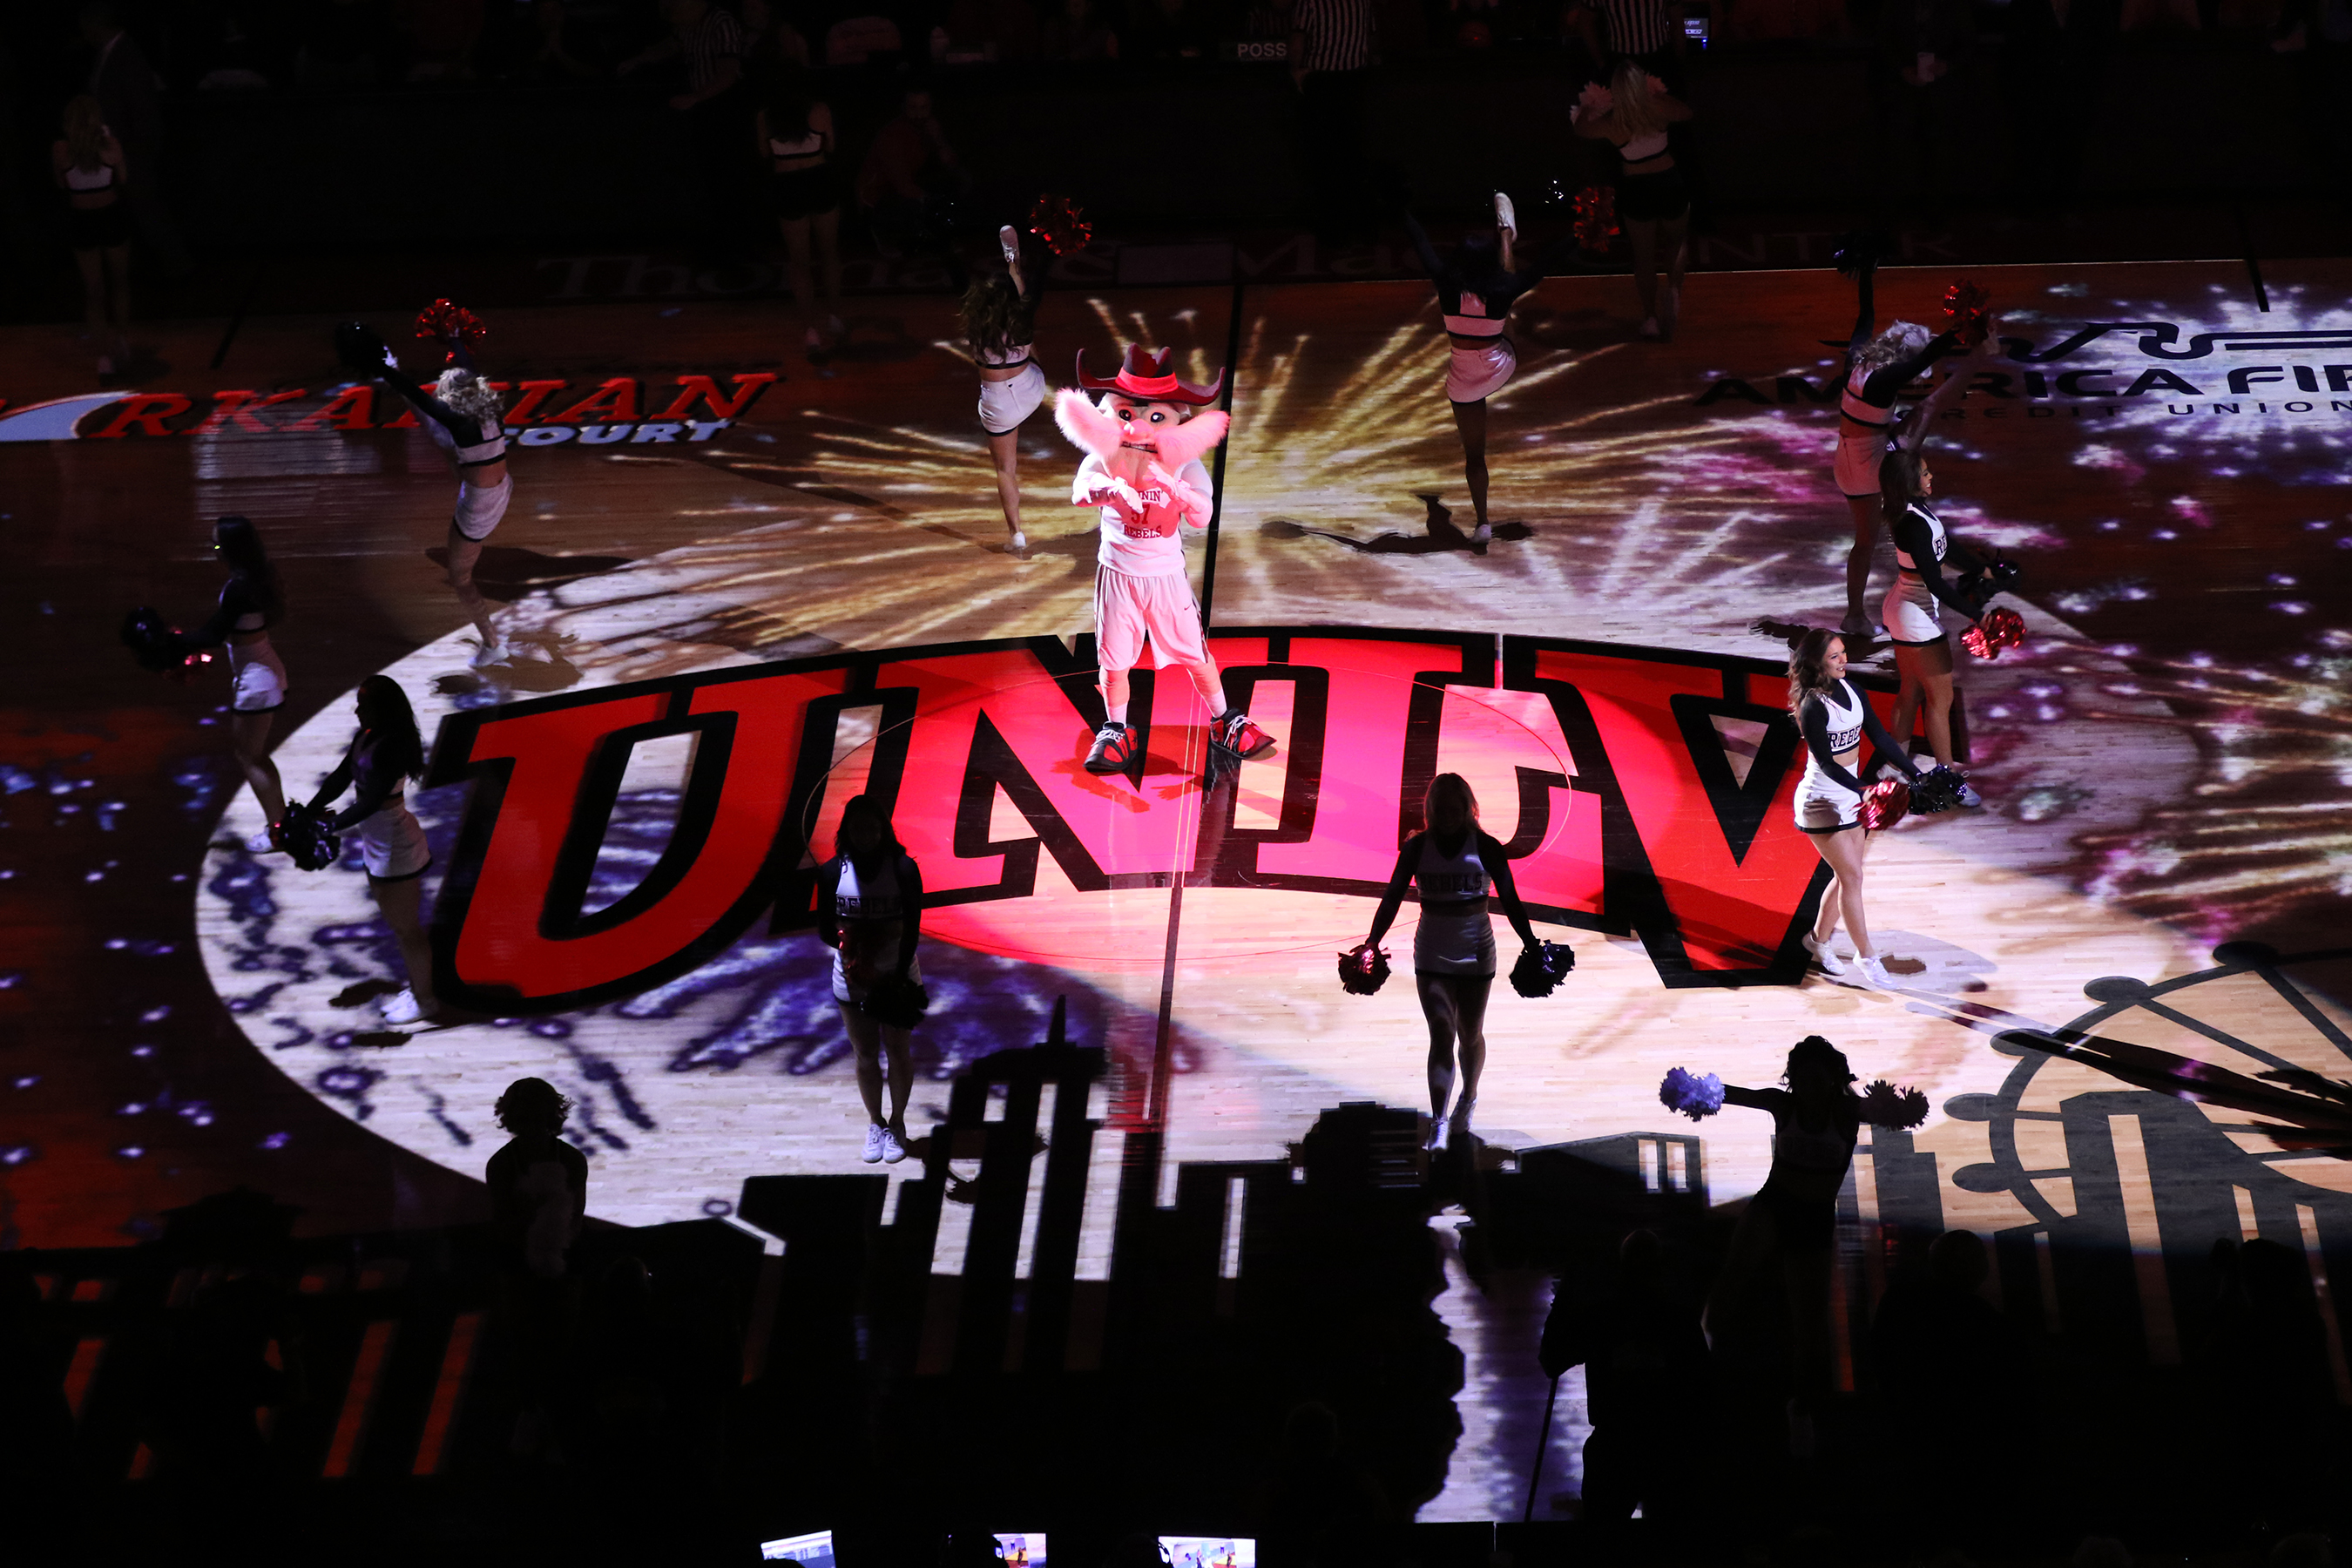 Epson laser projectors accentuate the stage for UNLV Runnin’ Rebels college basketball mascot